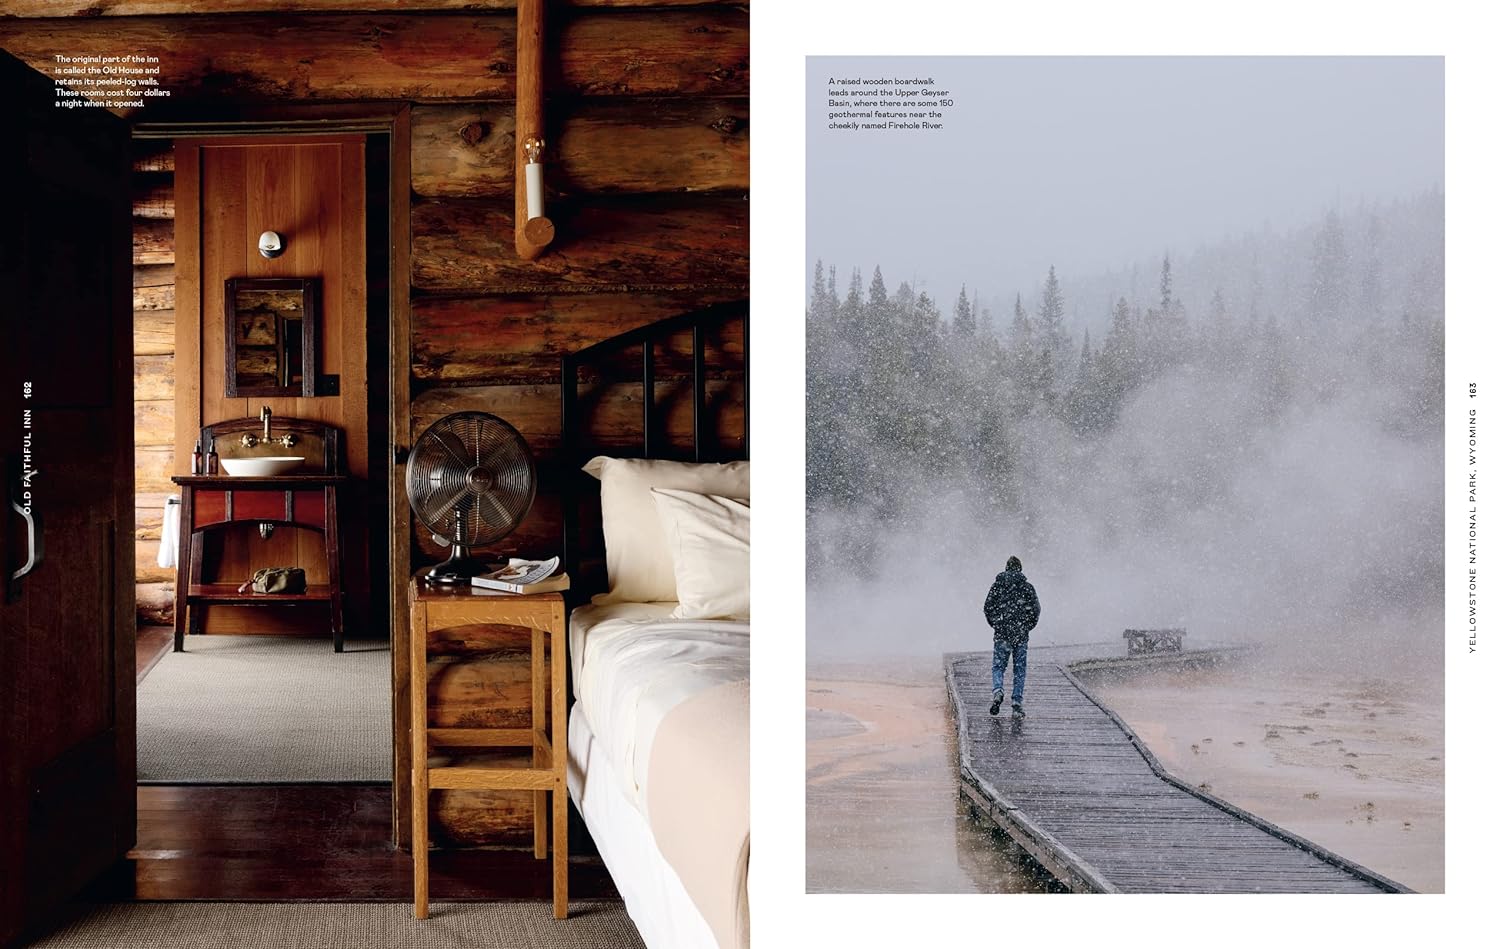 Lodge: An Indoorsy Tour of America’s National Parks